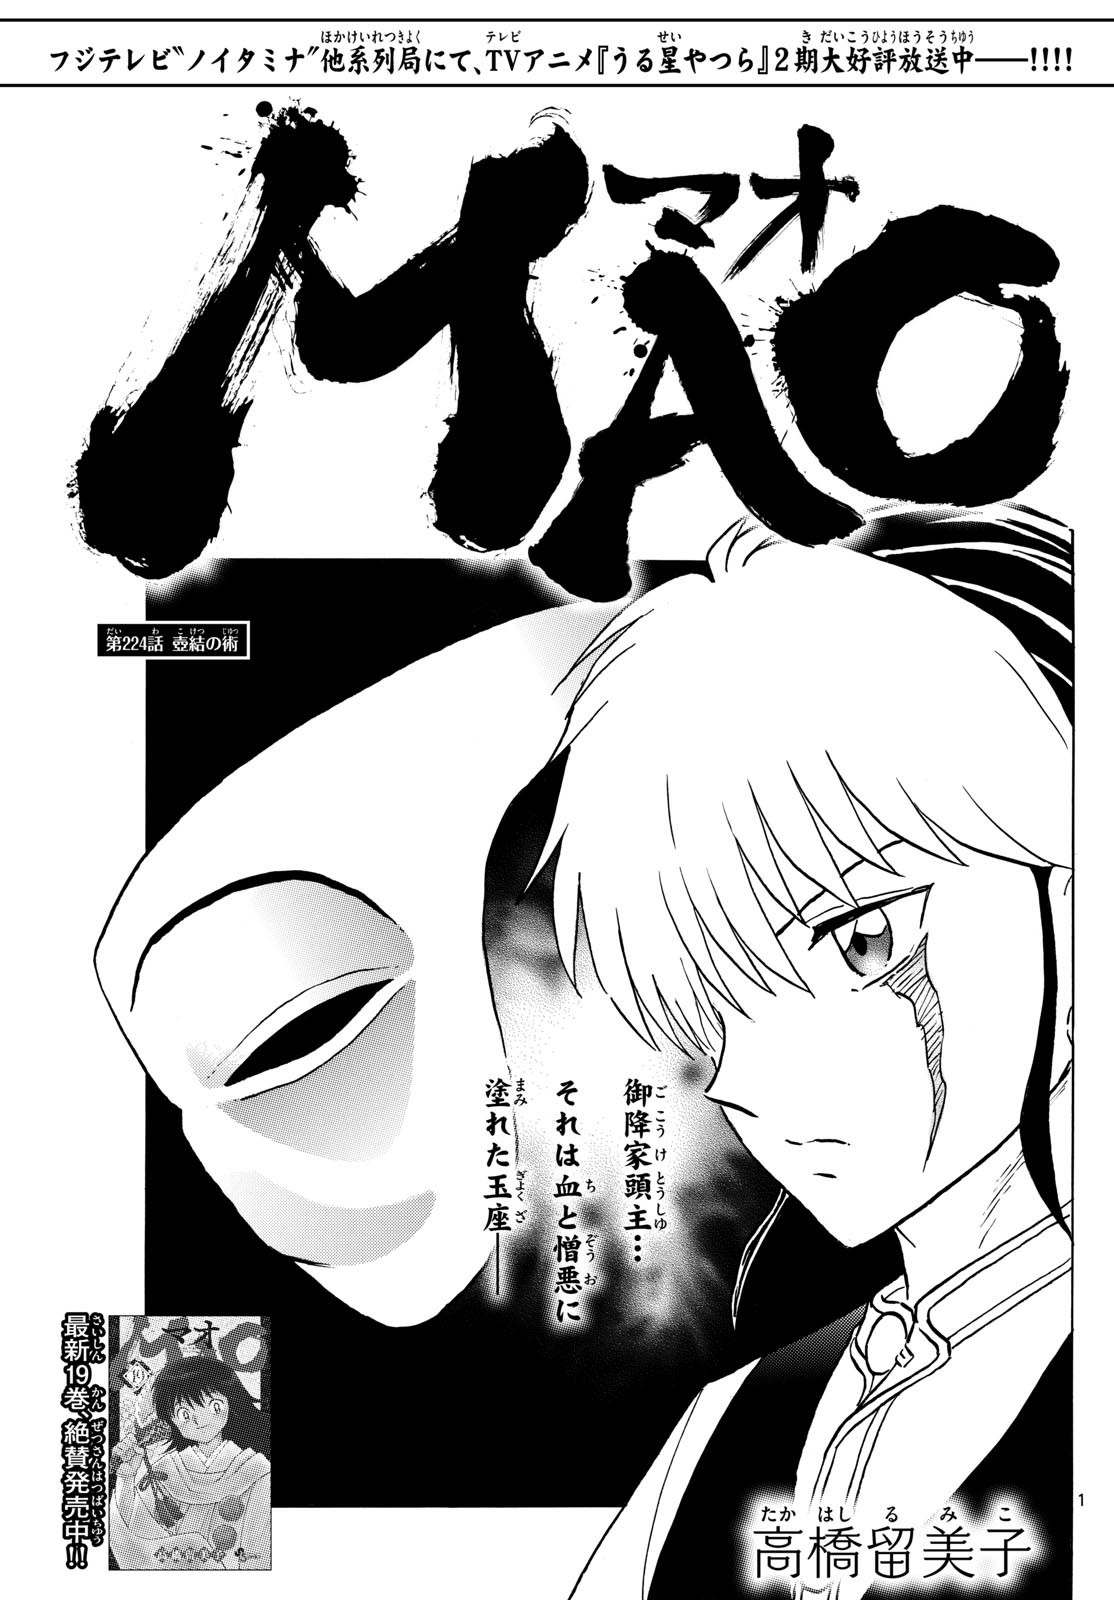 MAO - Chapter 224 - Page 1